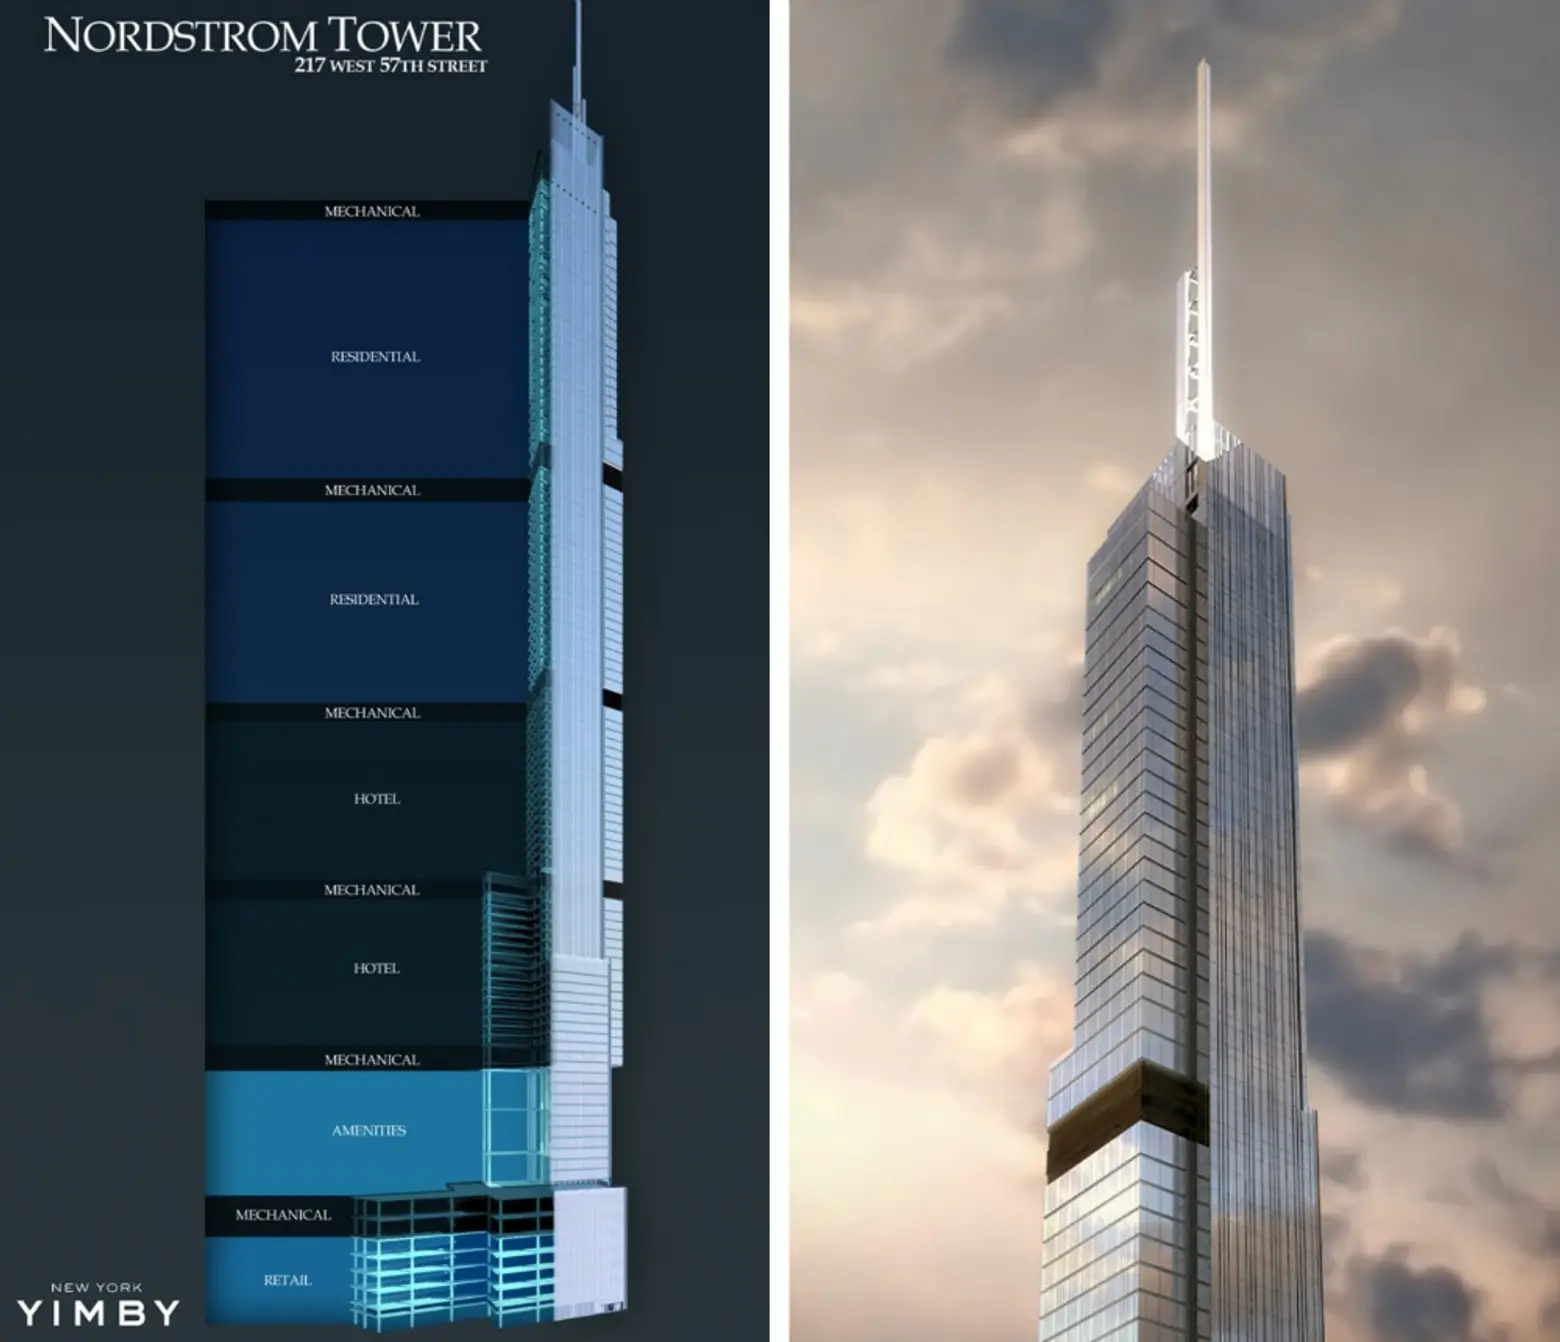 217 West 57th Street, Nordstrom Tower, Adrian Smith and Gordon Gill, NYC supertalls, Extell development, 432 Park Avenue